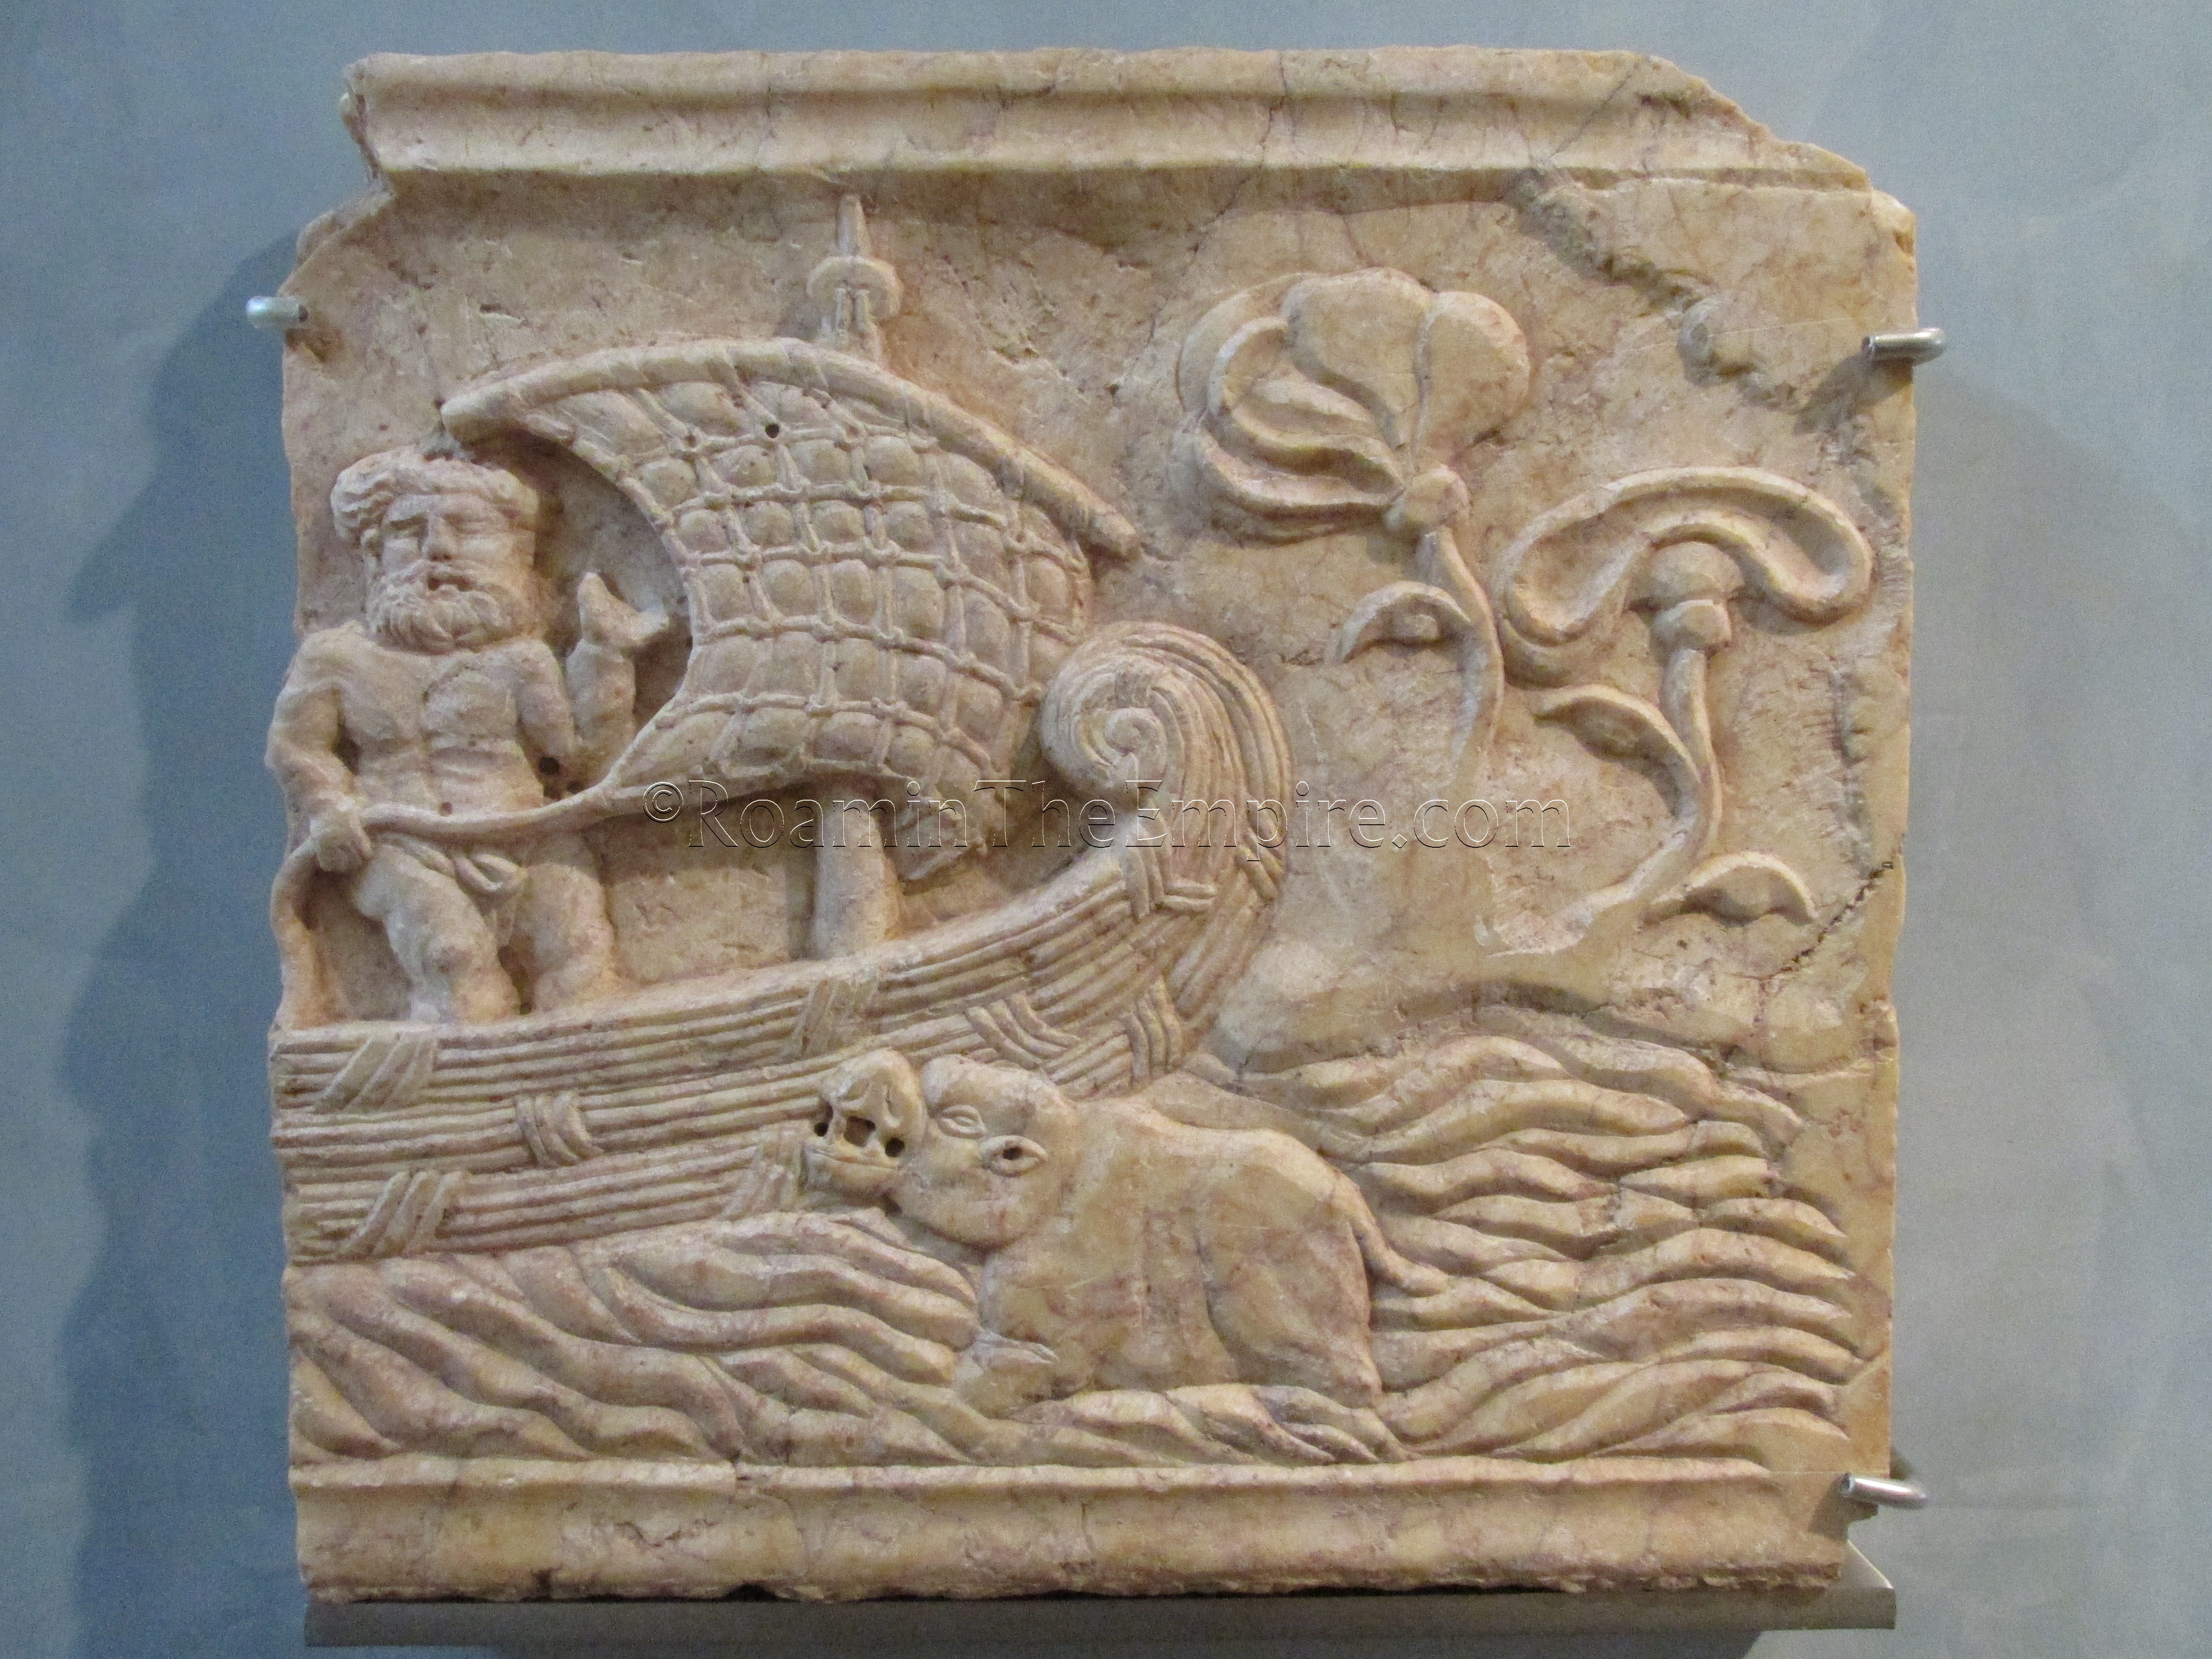 Marble relief of a Nilotic scene, 2nd-3rd century CE. Saguntum.